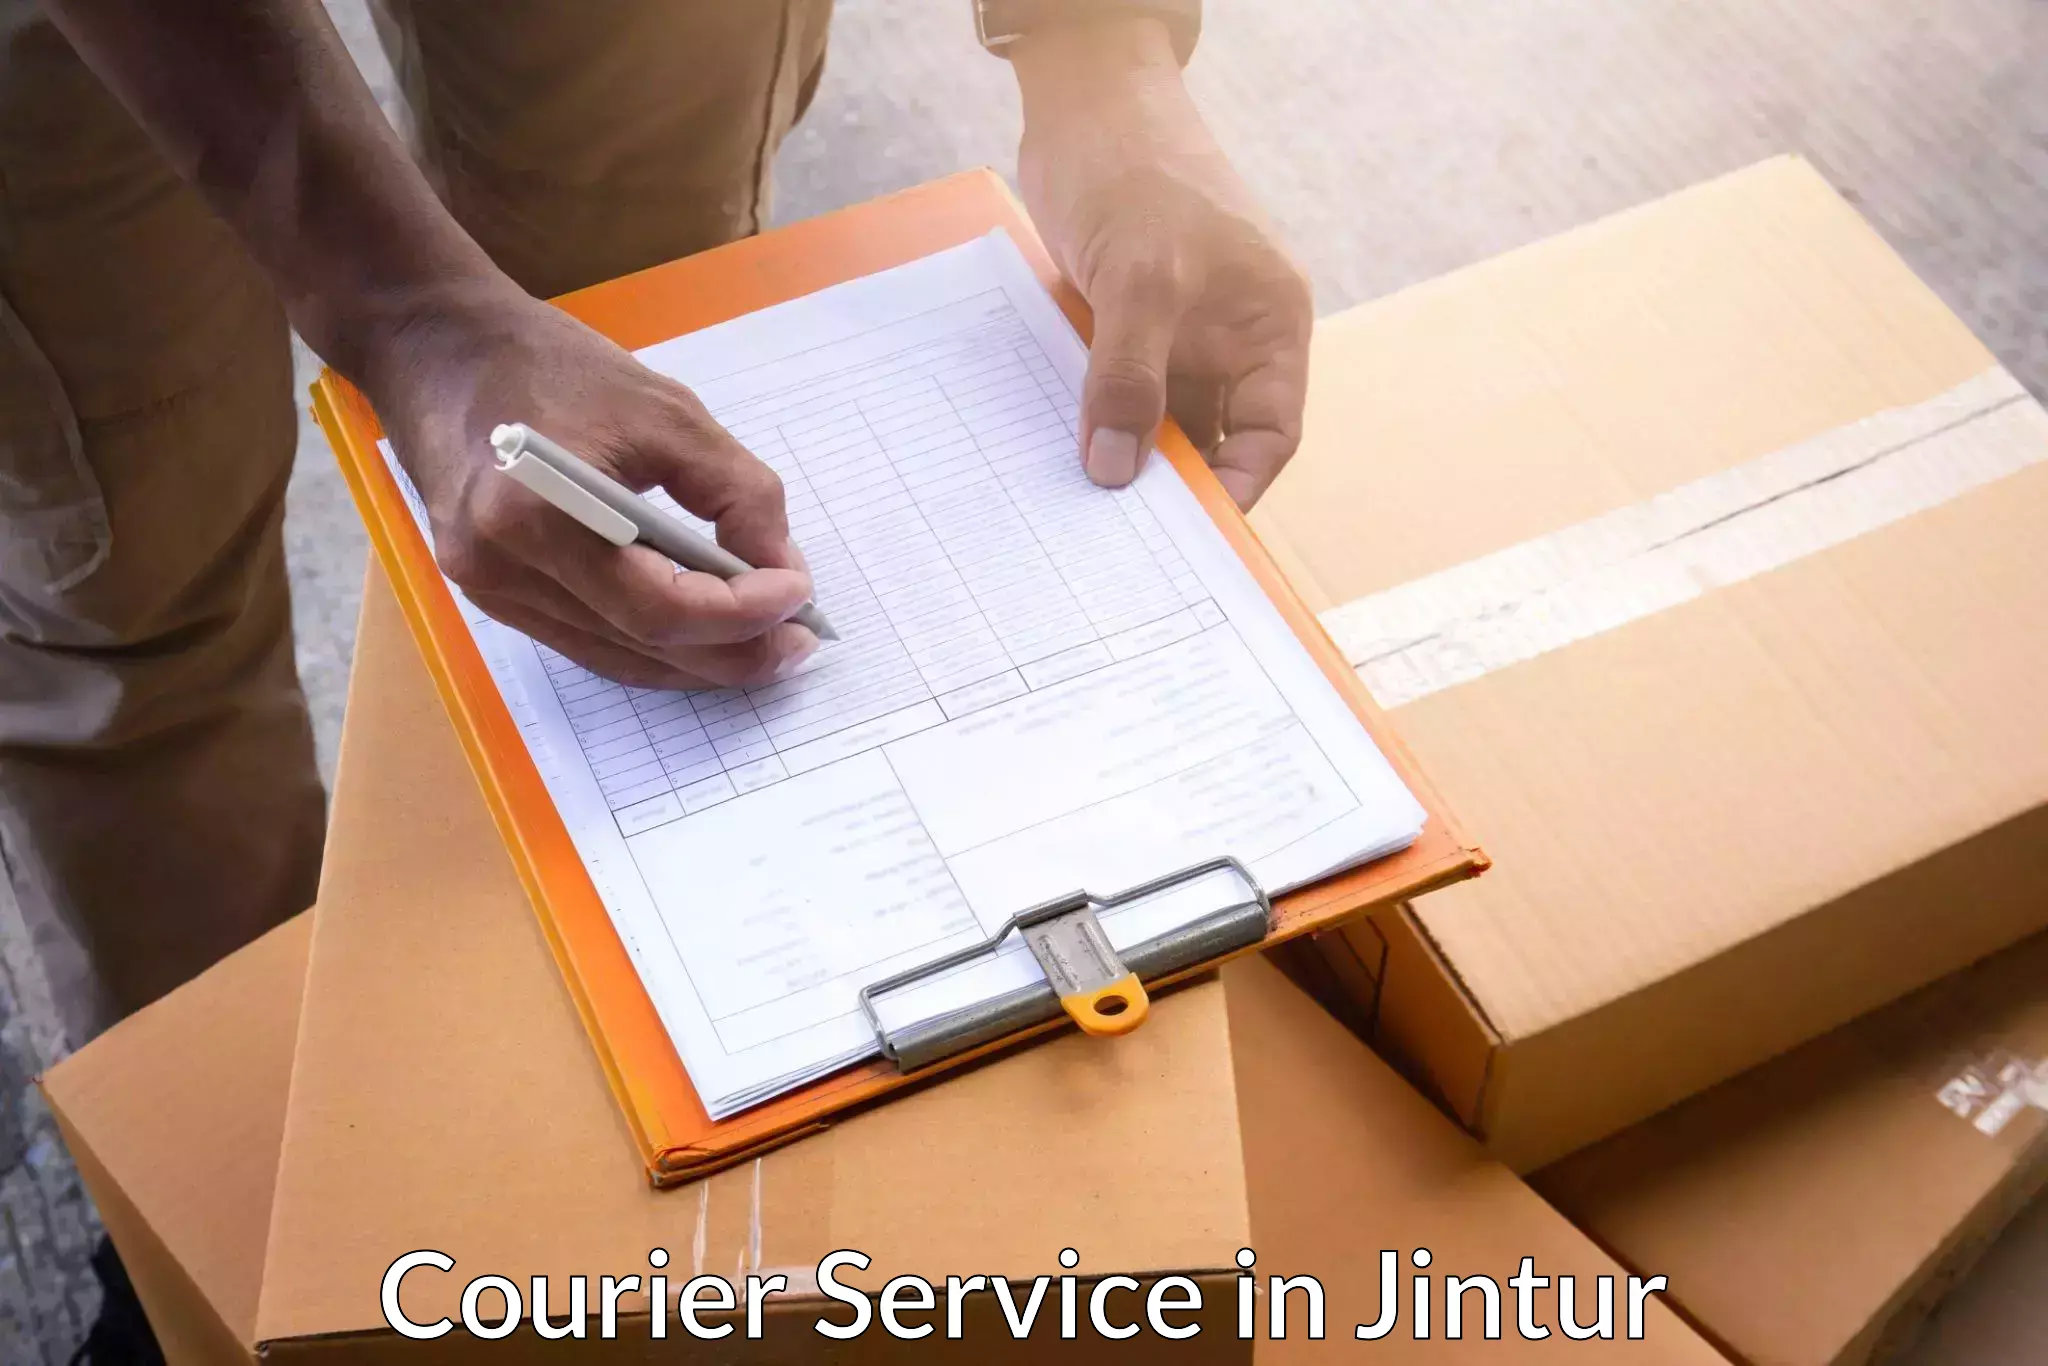 Sustainable shipping practices in Jintur